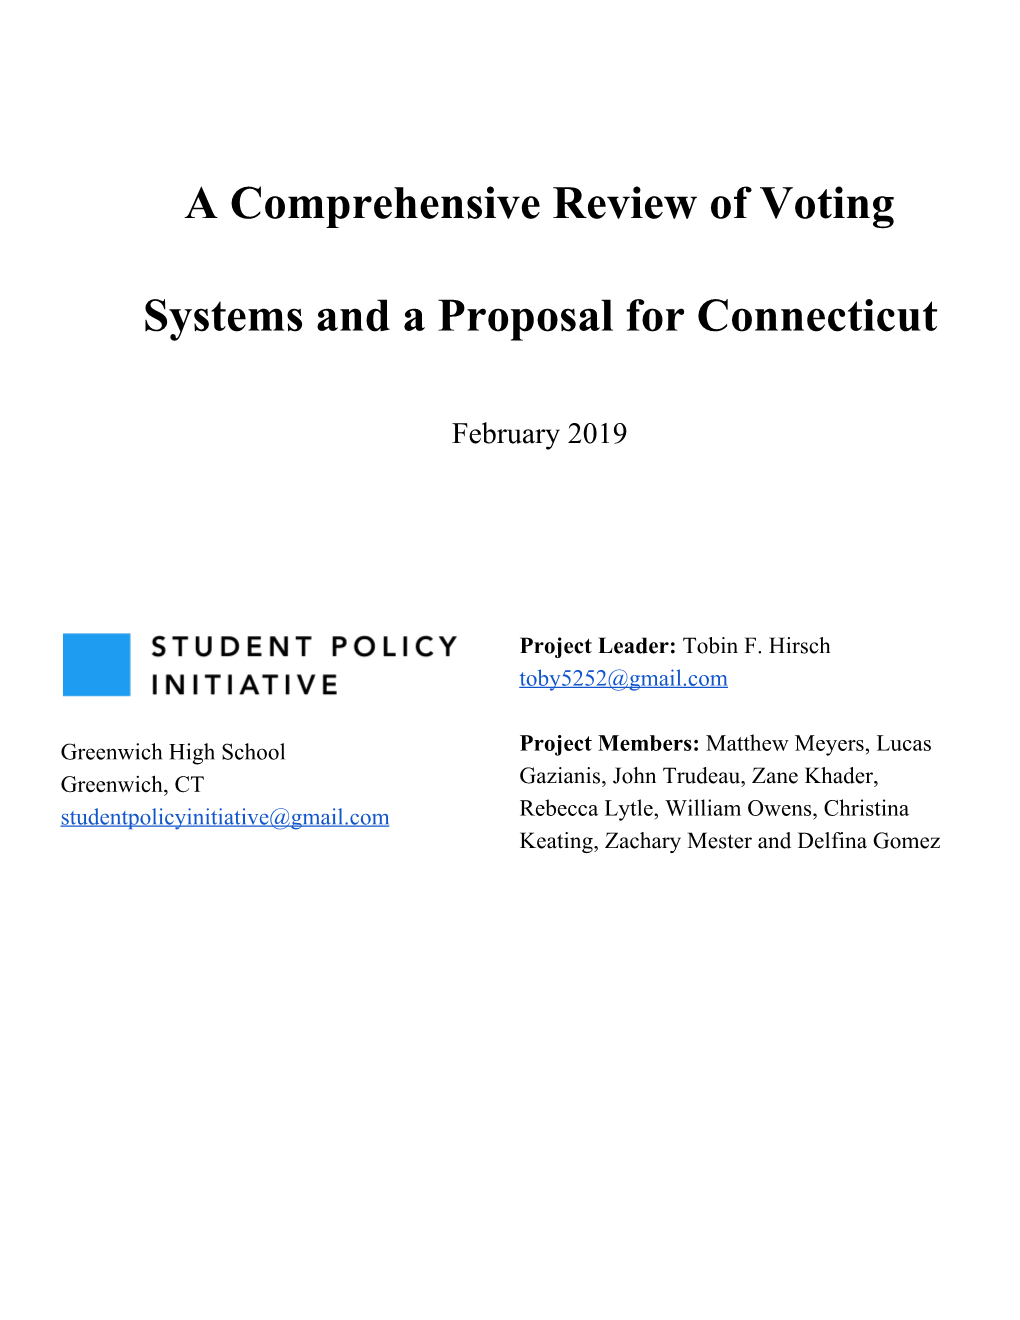 A Comprehensive Review of Voting Systems and a Proposal For